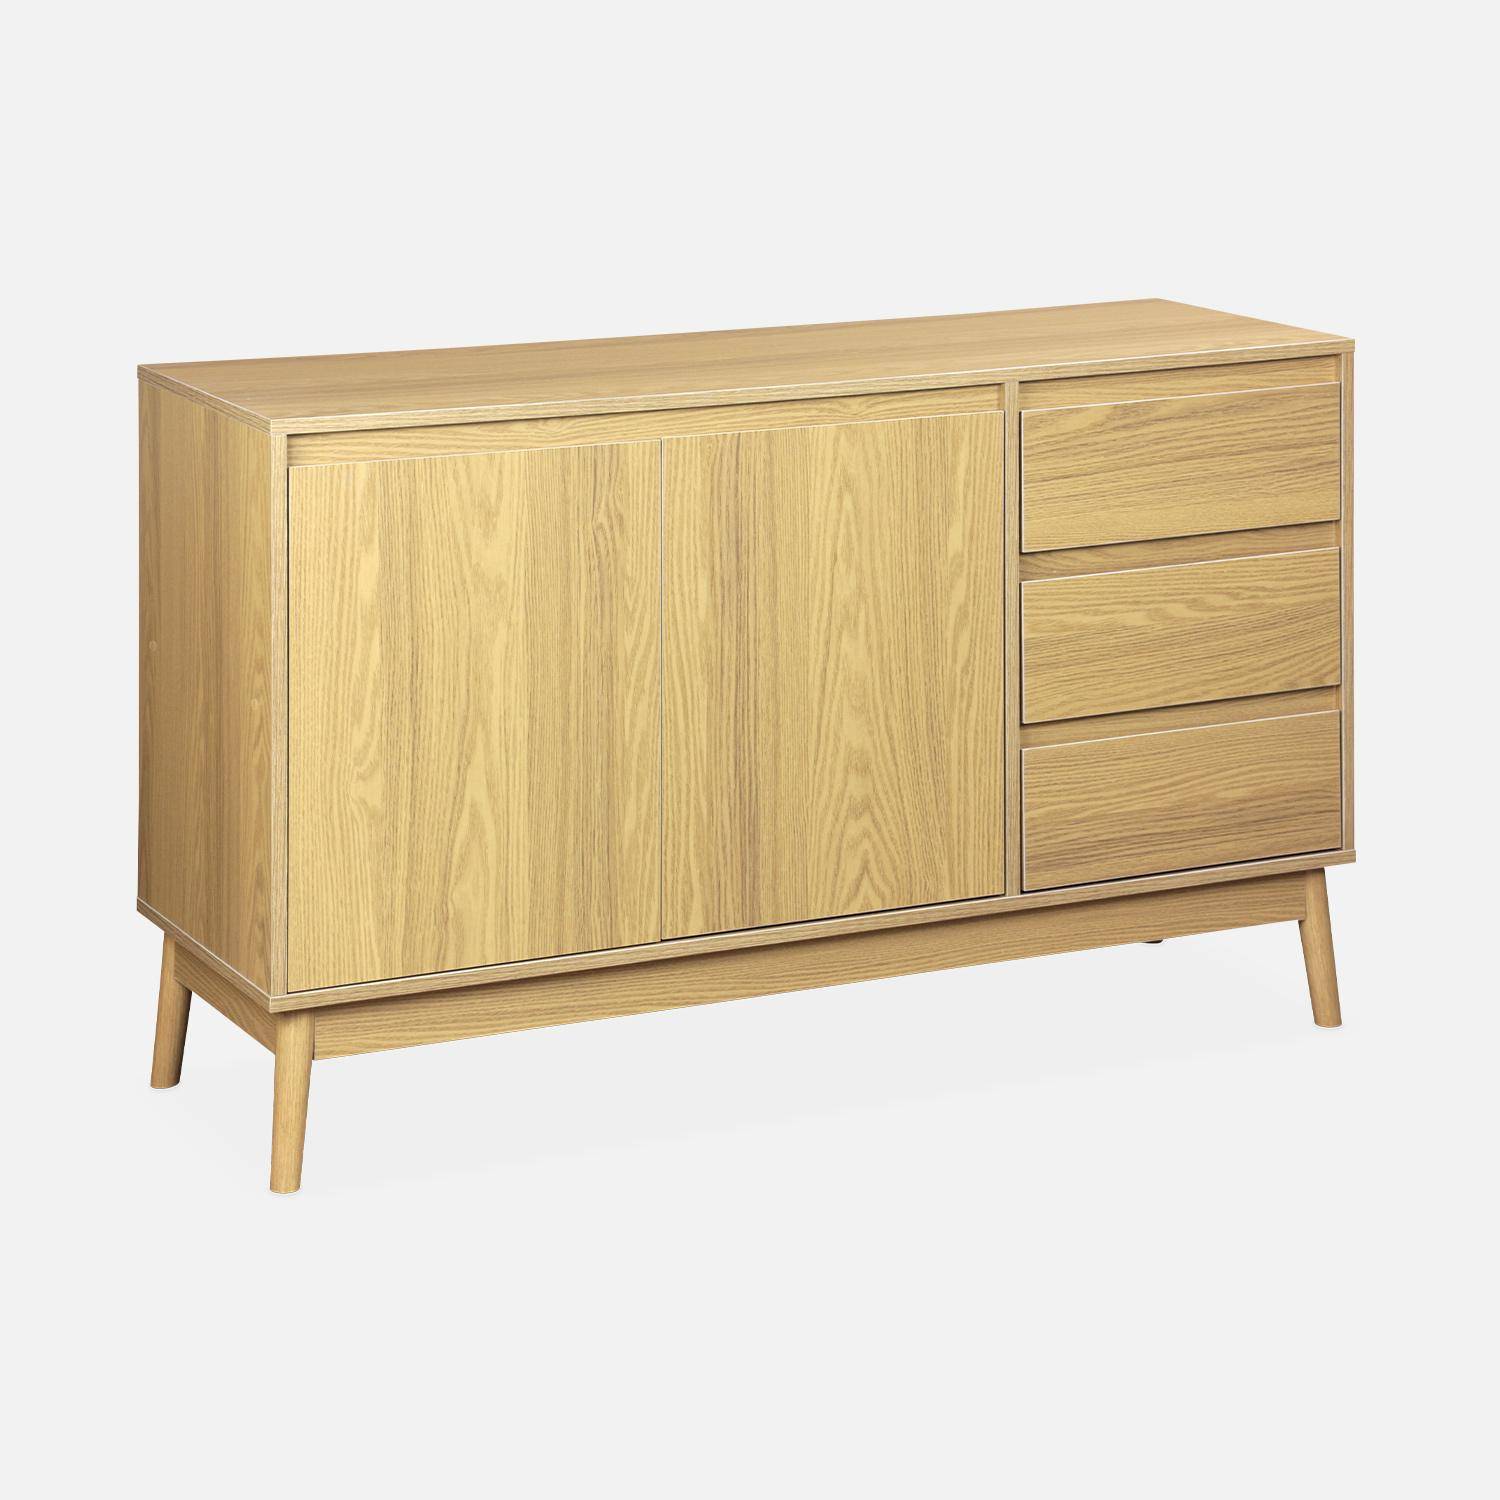 Wooden sideboard with 2 doors and 3 drawers L 120 x W 39 H 76cm - Dune,sweeek,Photo3